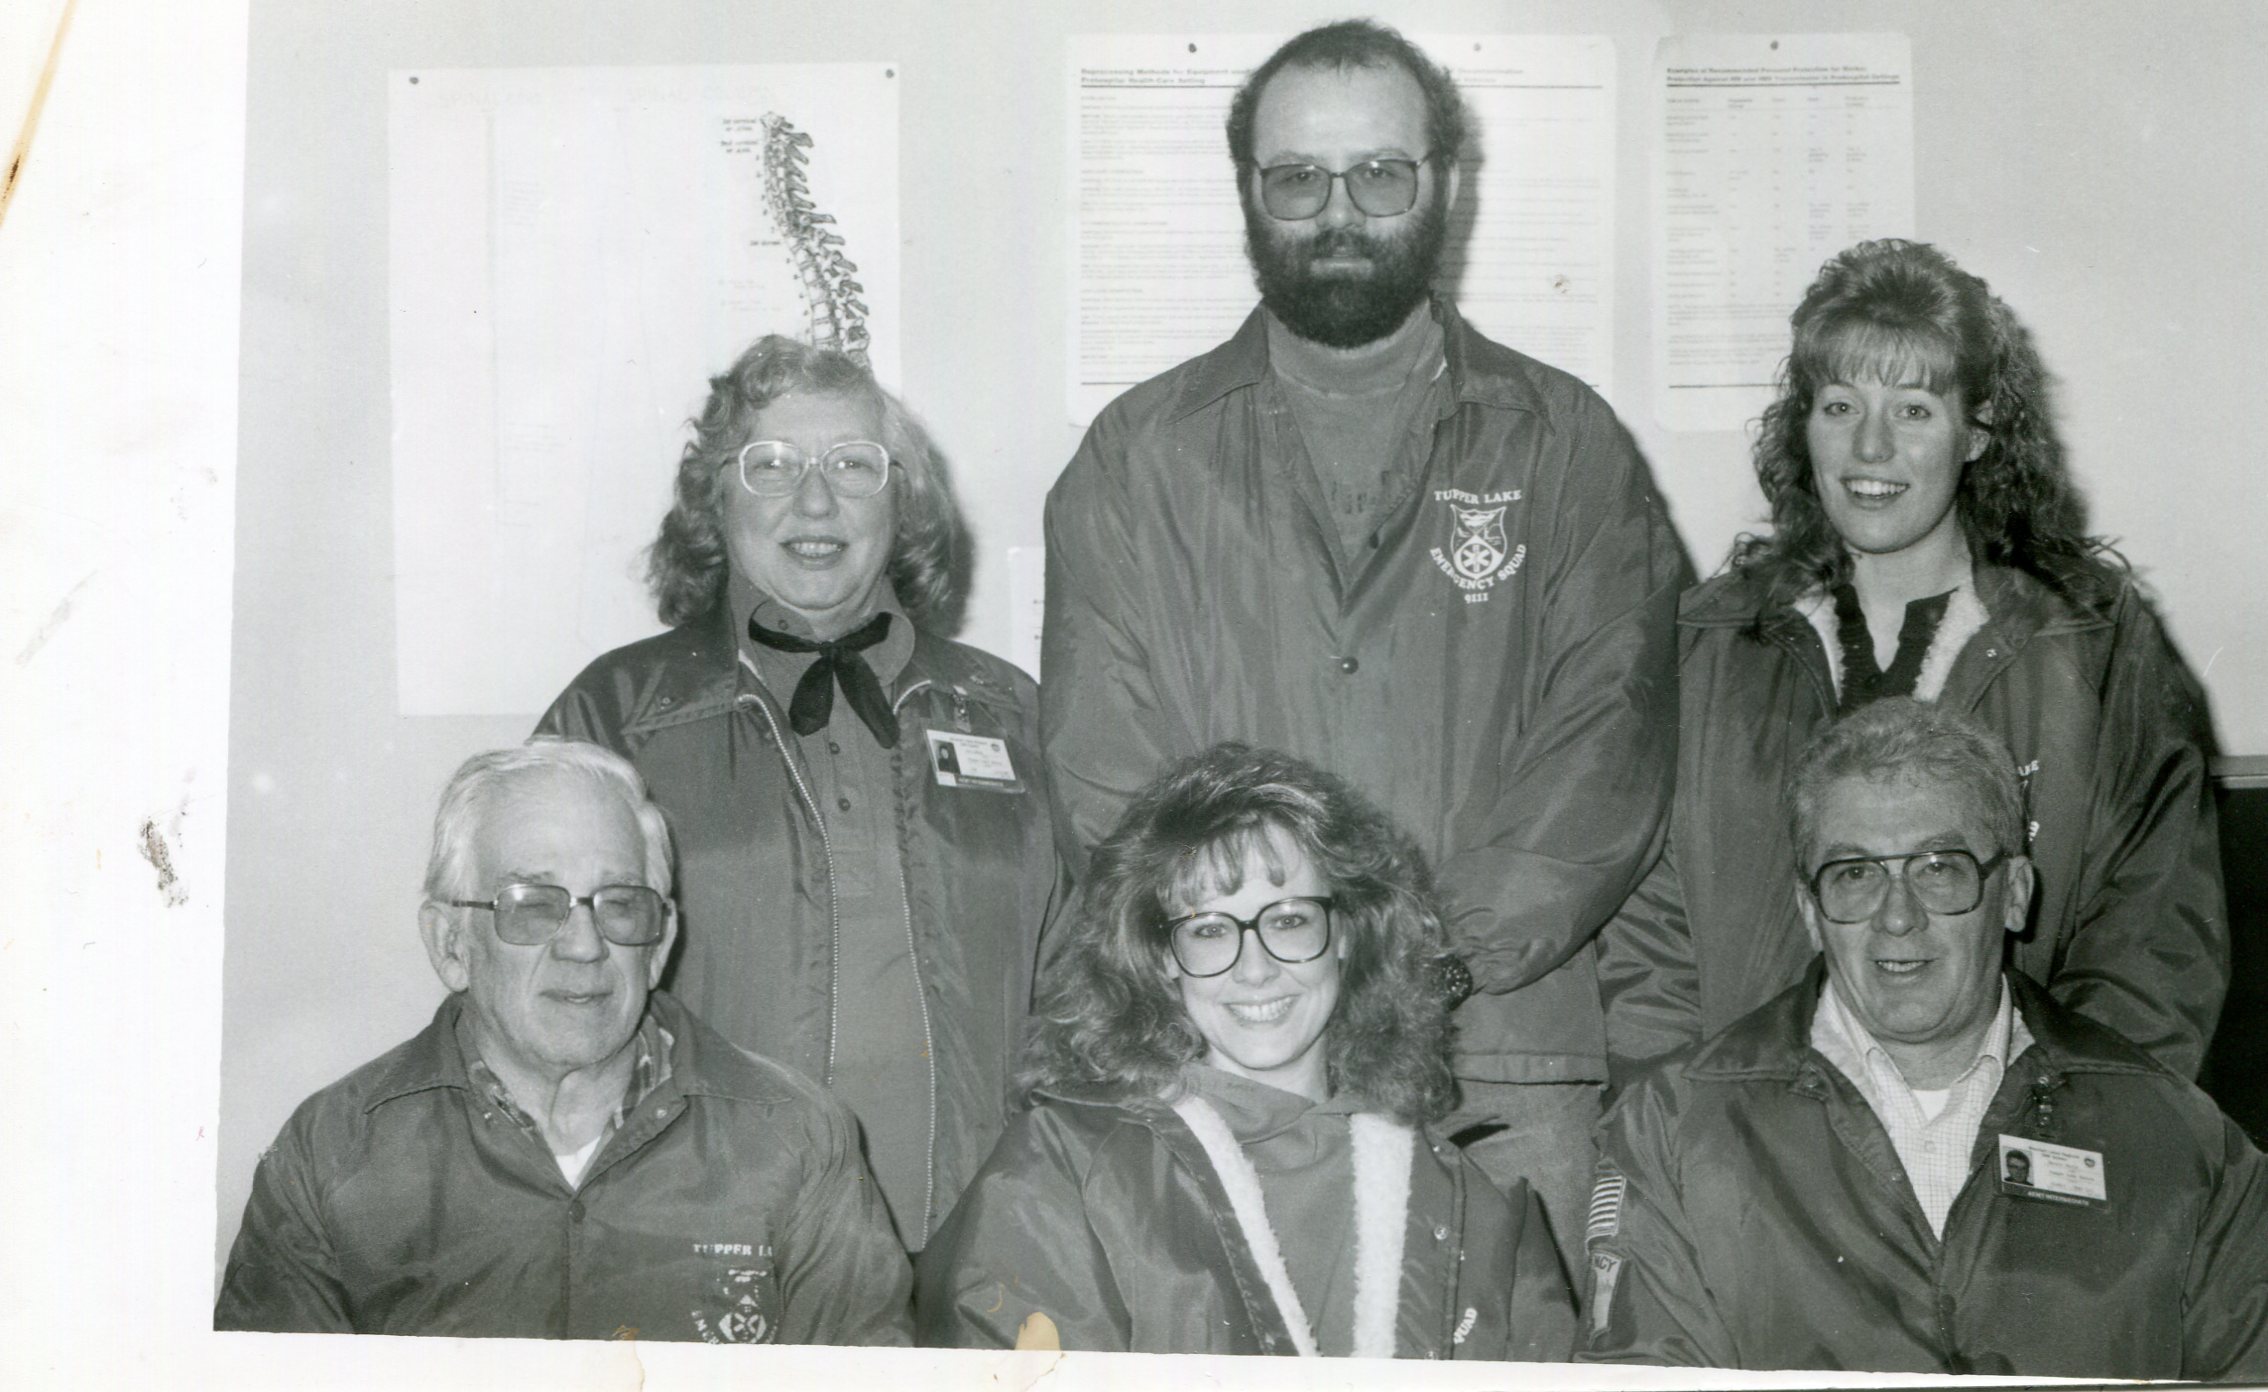   This 1992-era photo by Kathleen Bigrow shows some of the rescue squad's active volunteers at the time: front row from left- Maurice Corrow, Judy Duval and Ben Morin. In back from left were Ann LaVoy, Brian Dukette and Kim Mace.  